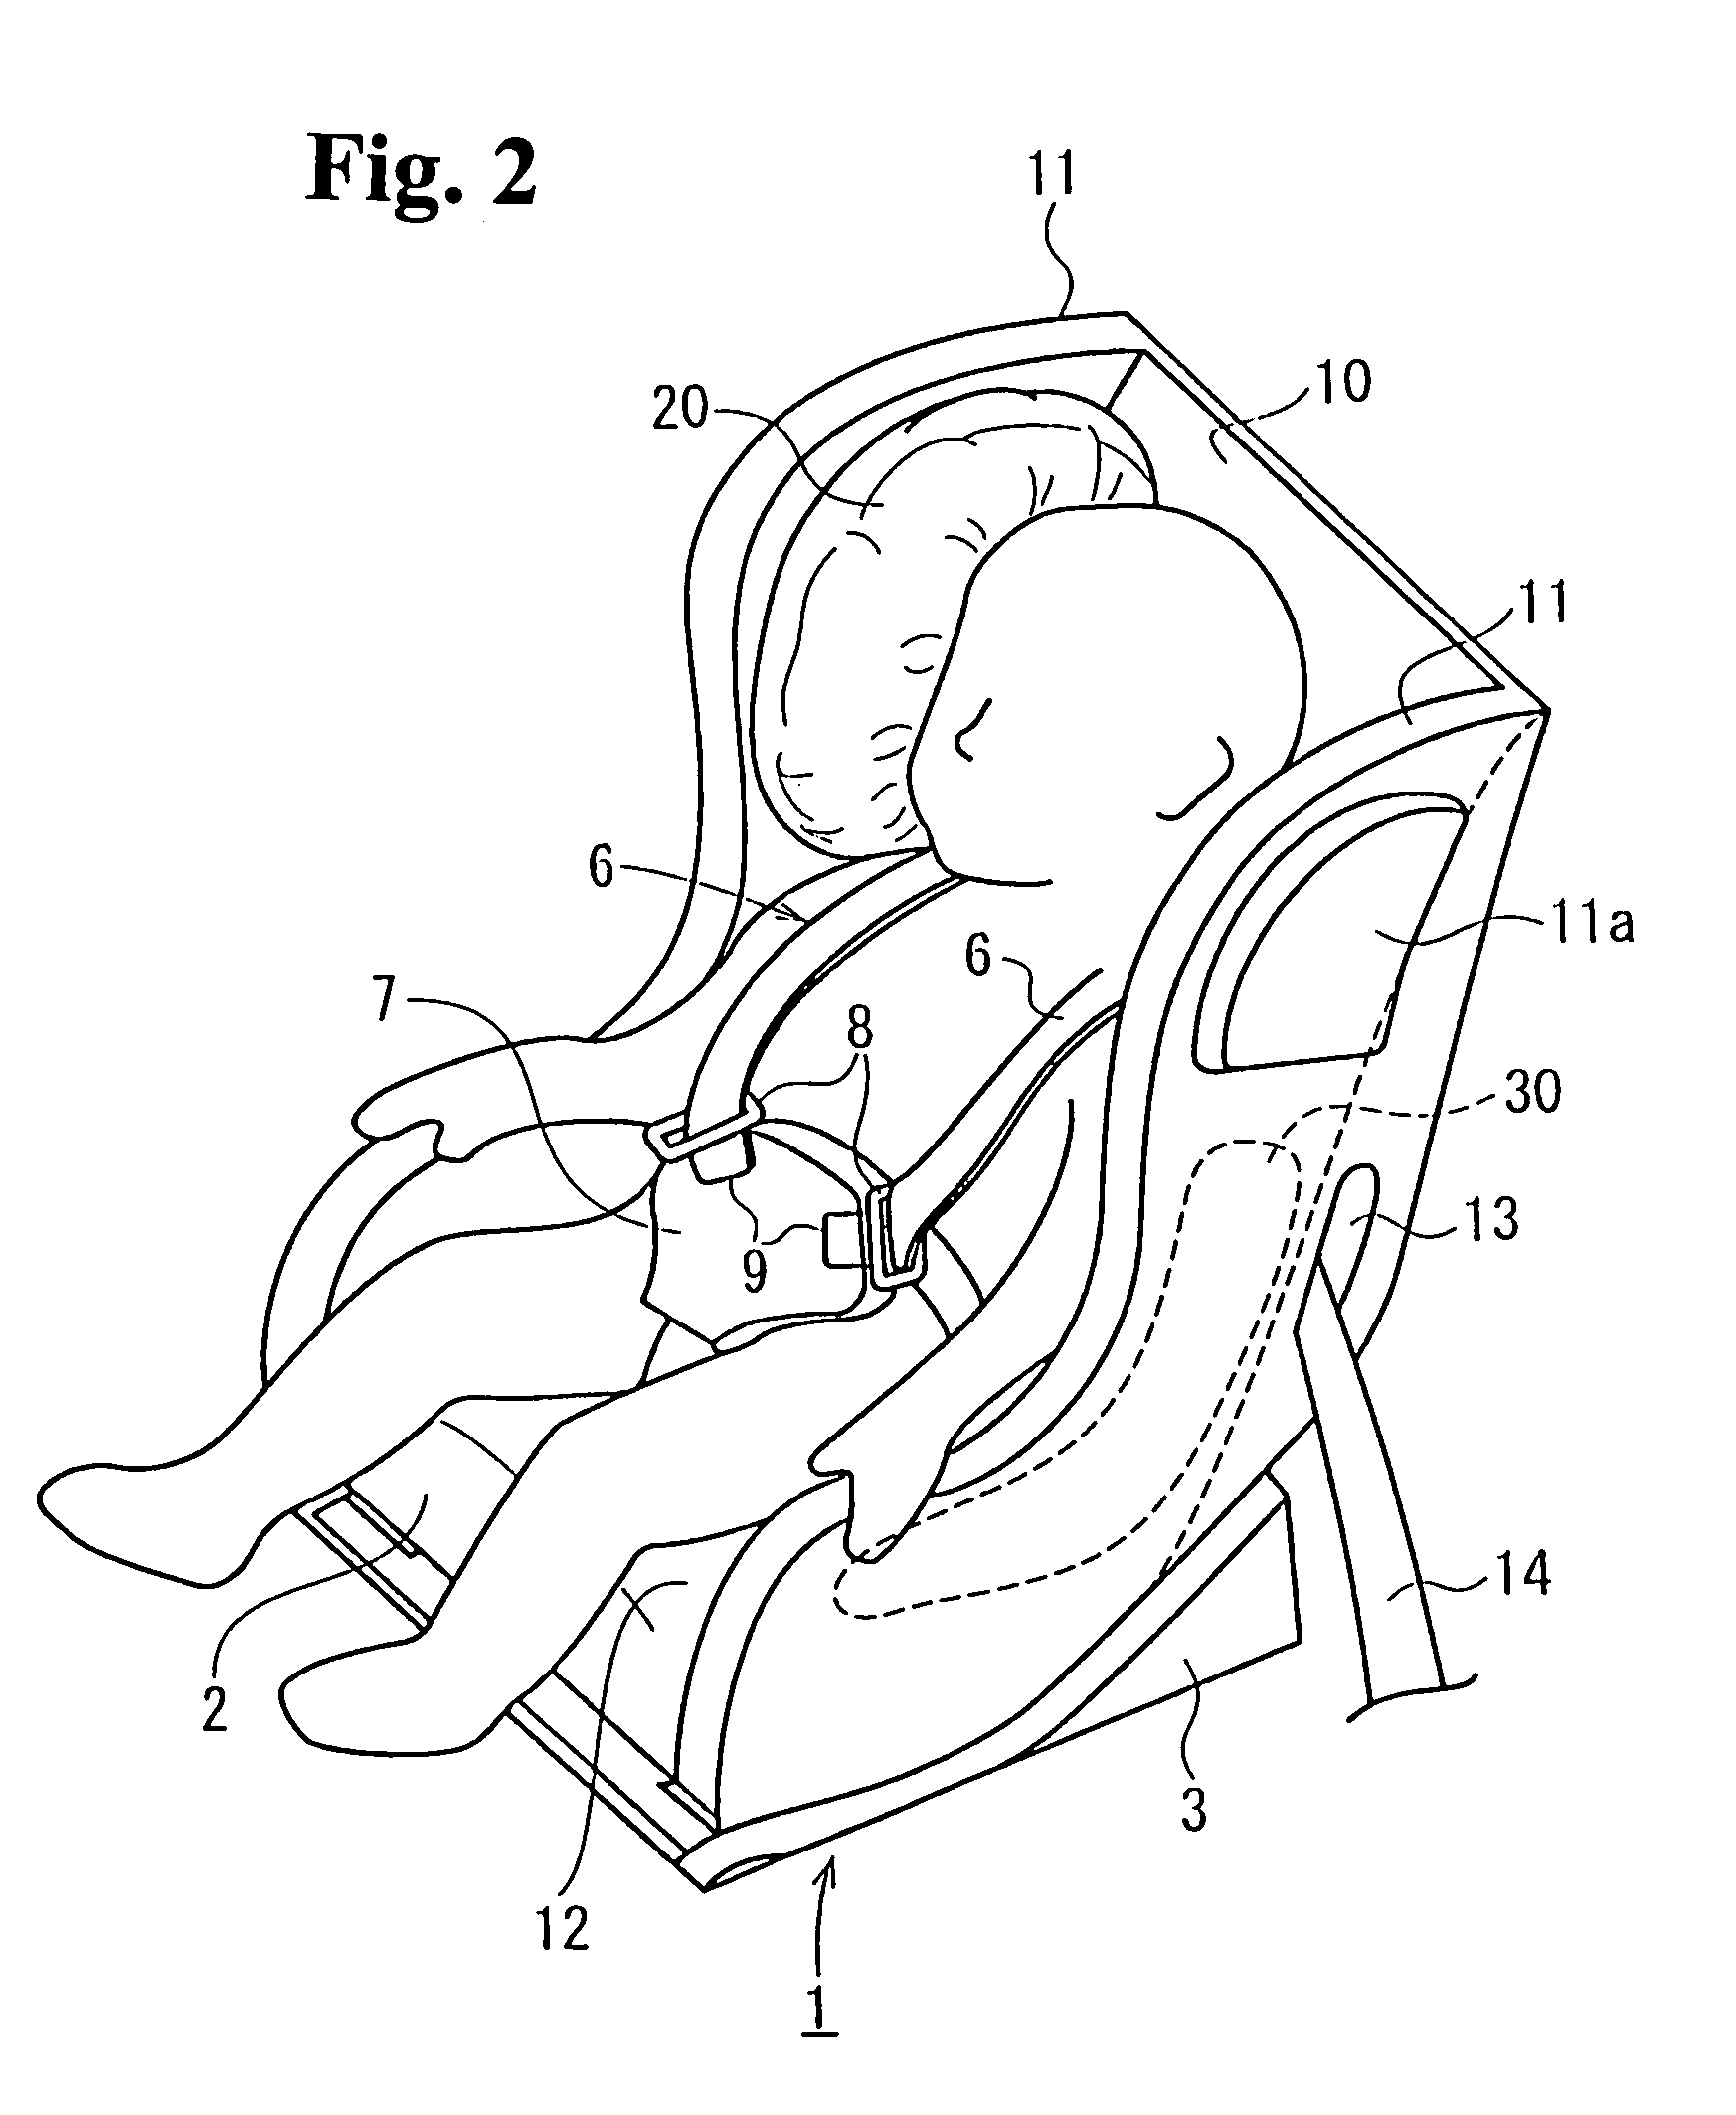 Child seat with deployable side airbags